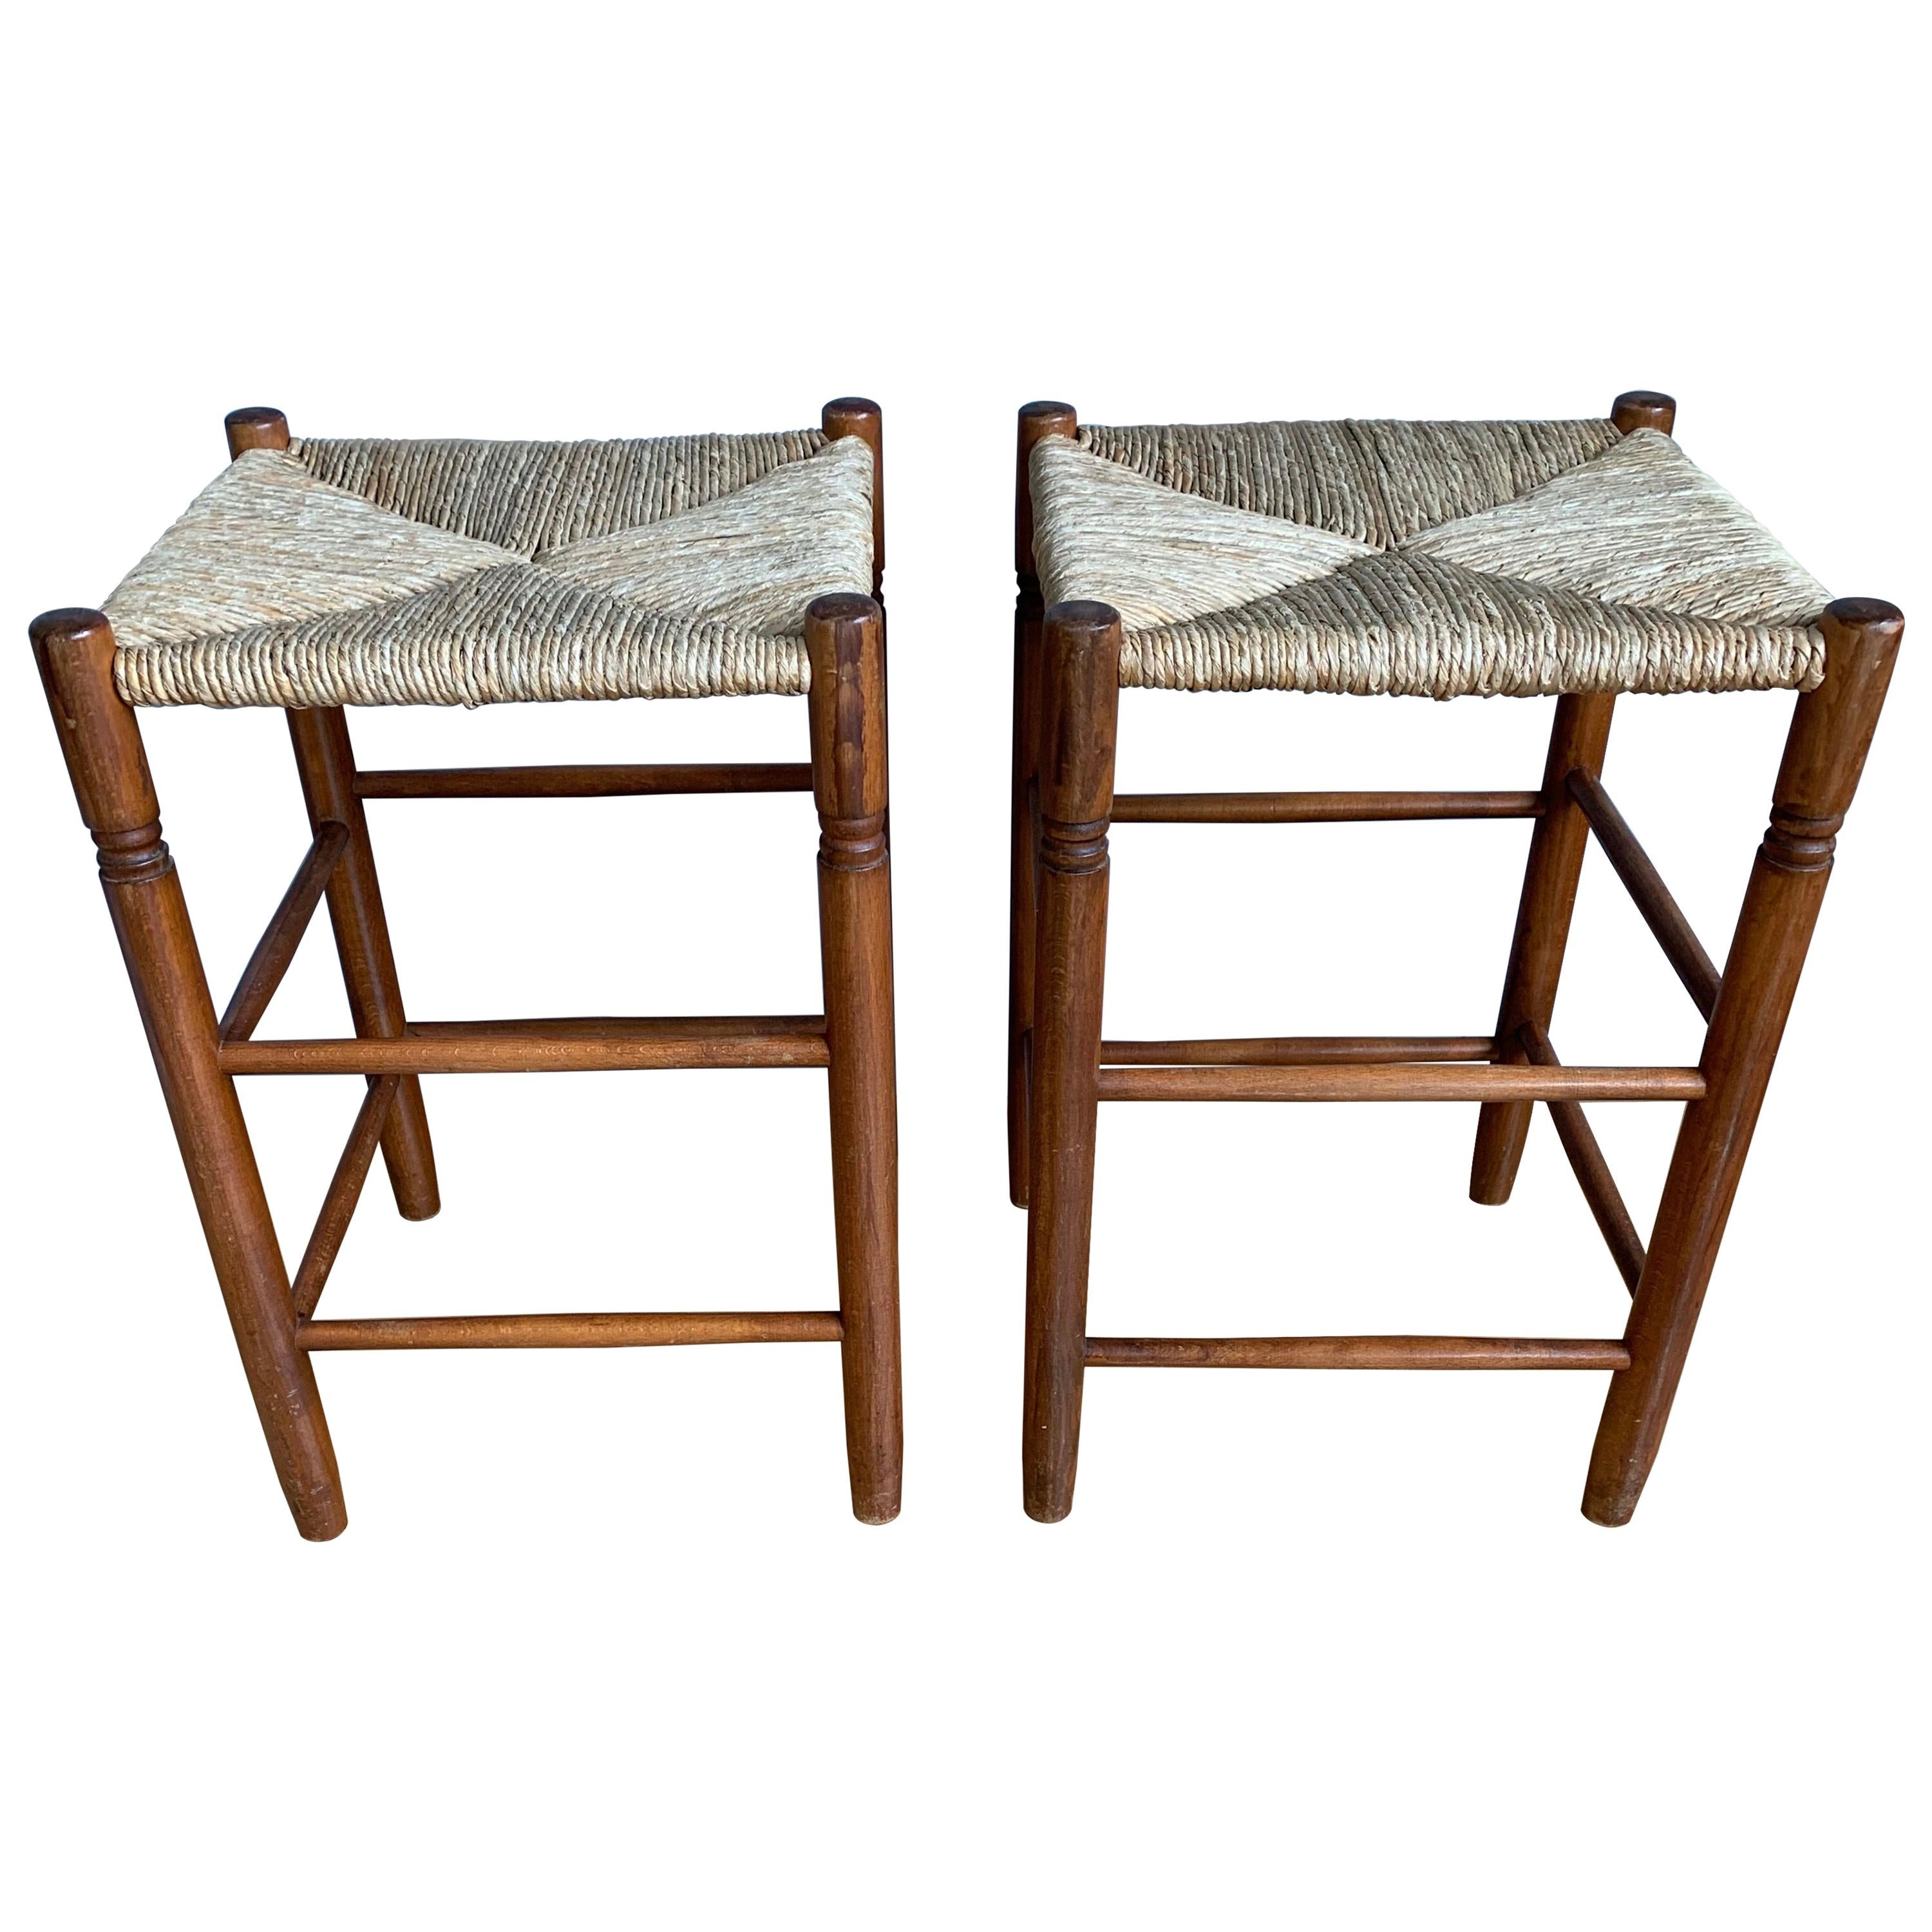 Pair Vintage Wood Country House Stools with Rush Seats Charlotte Perriand Style